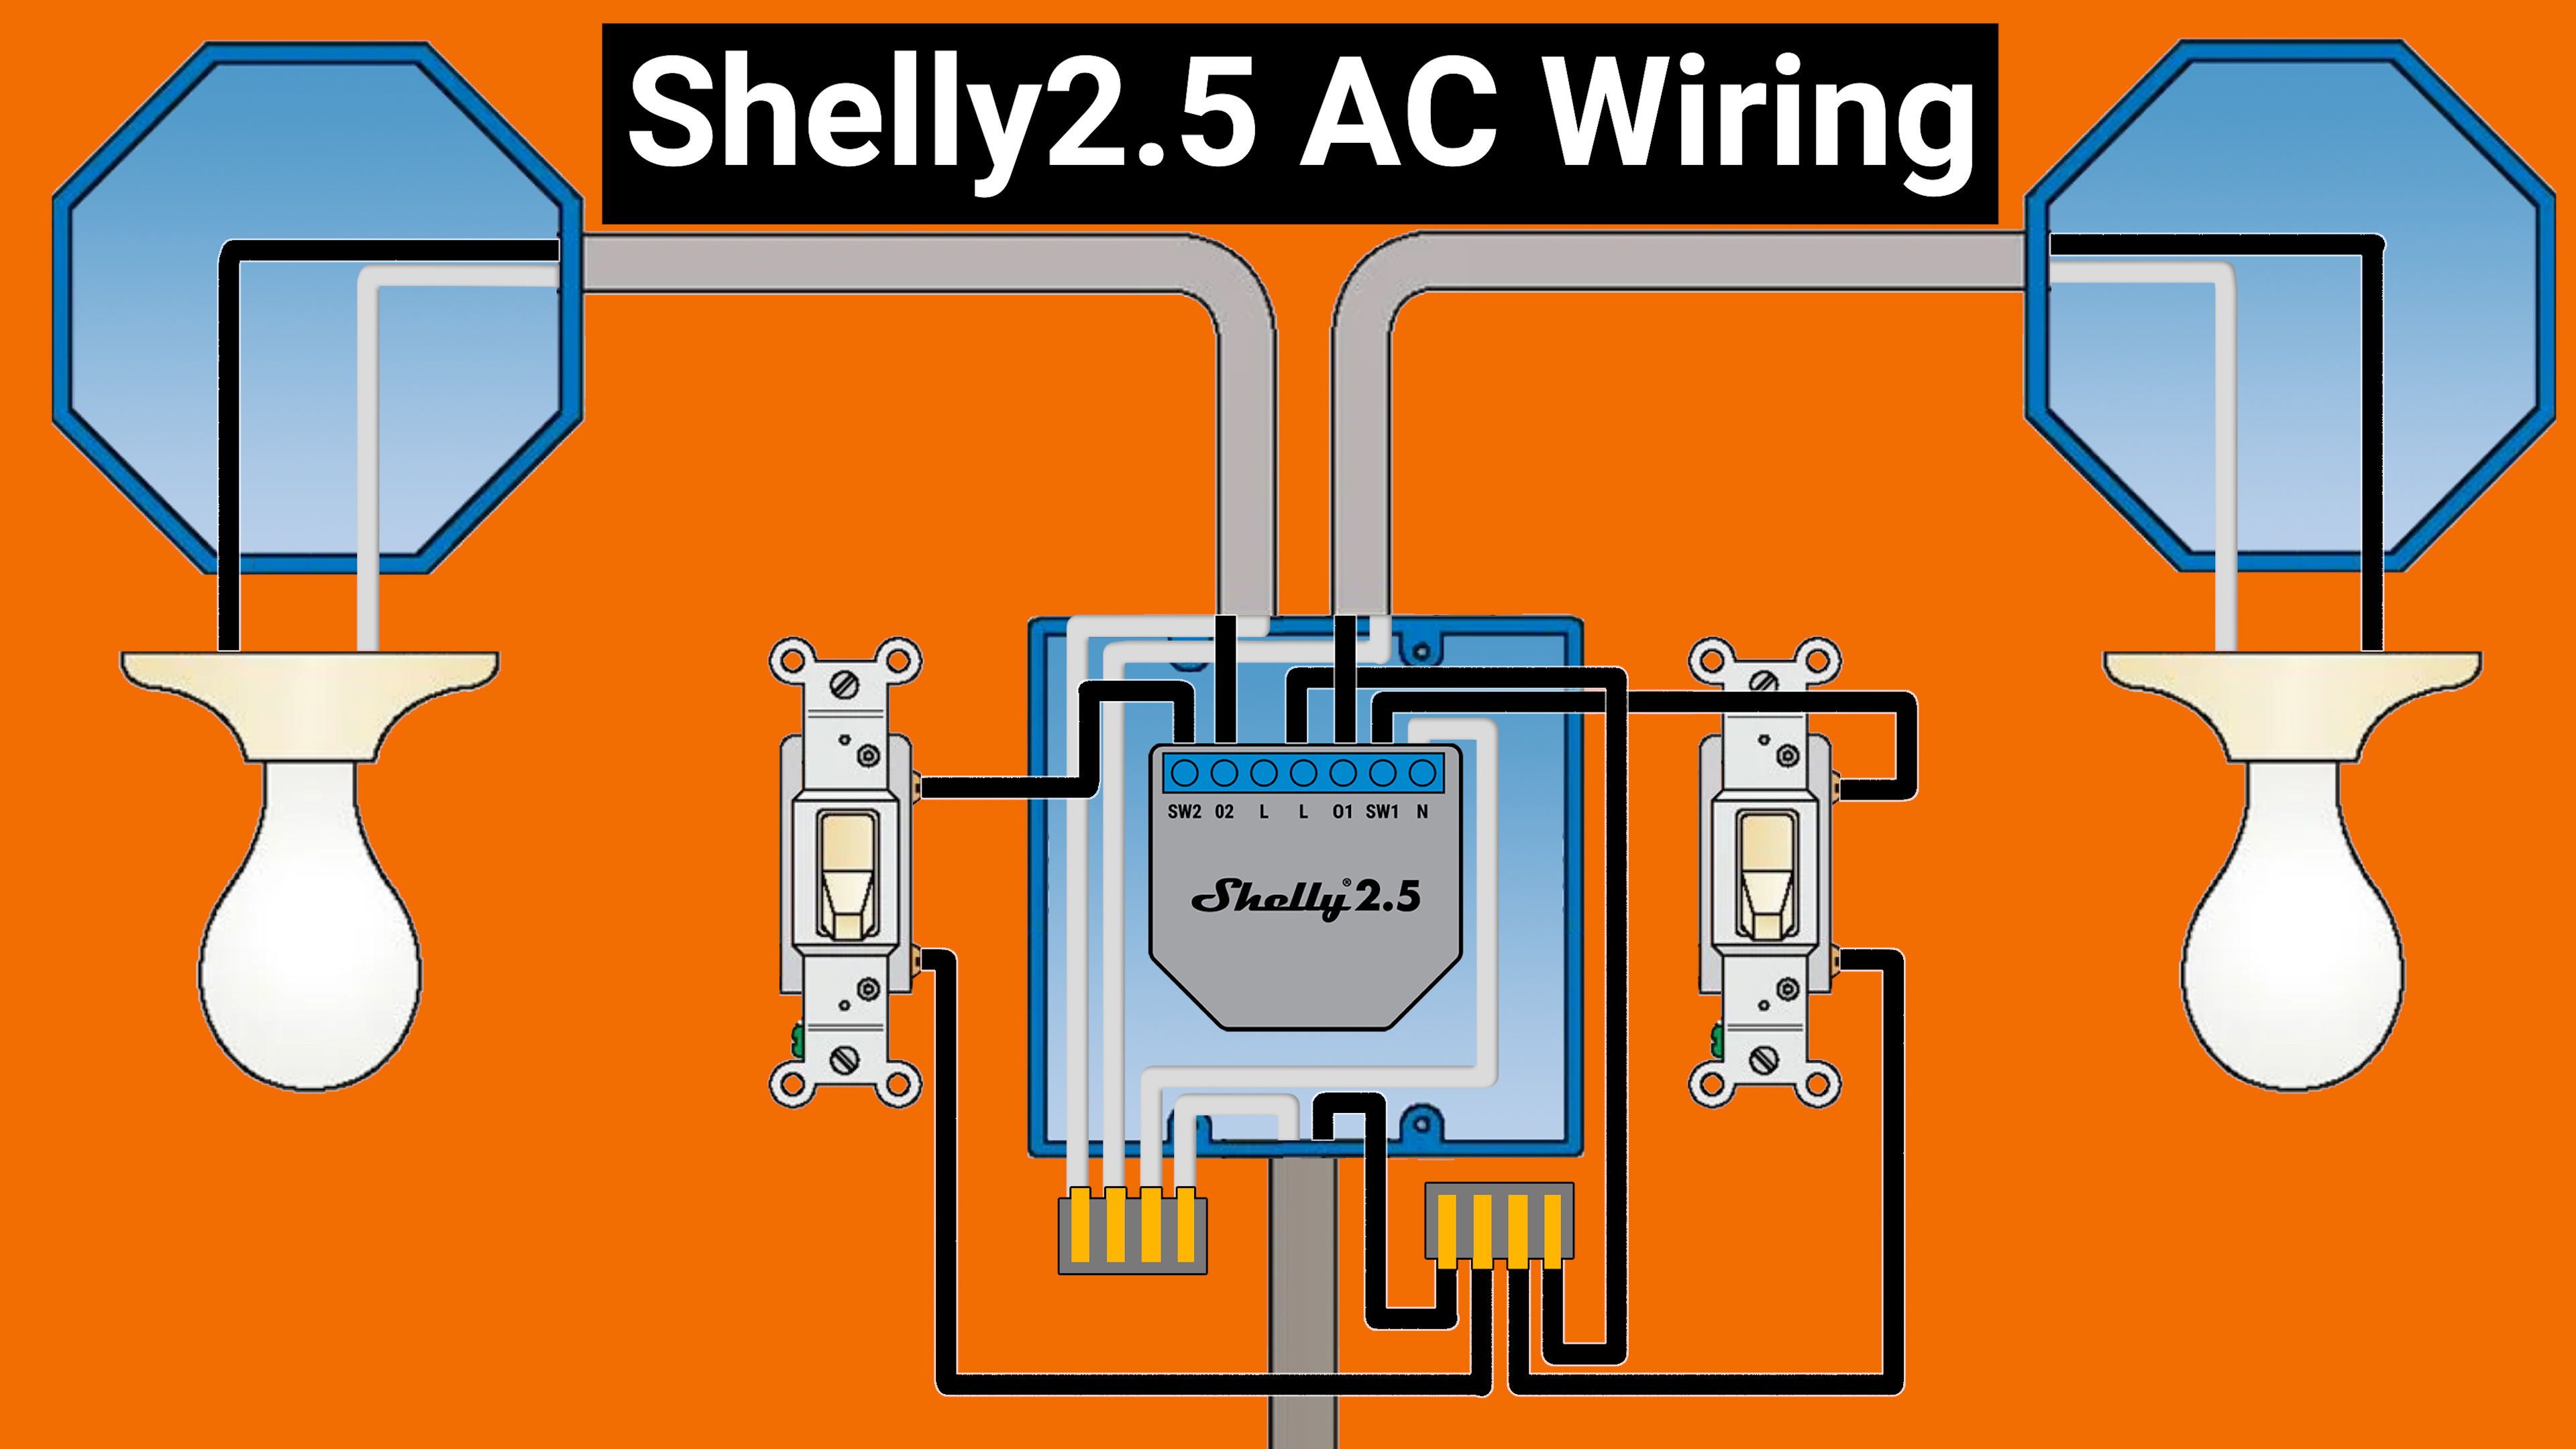 http://www.thesmarthomehookup.com/wp-content/uploads/2021/09/shelly-2.5-wiring.jpg